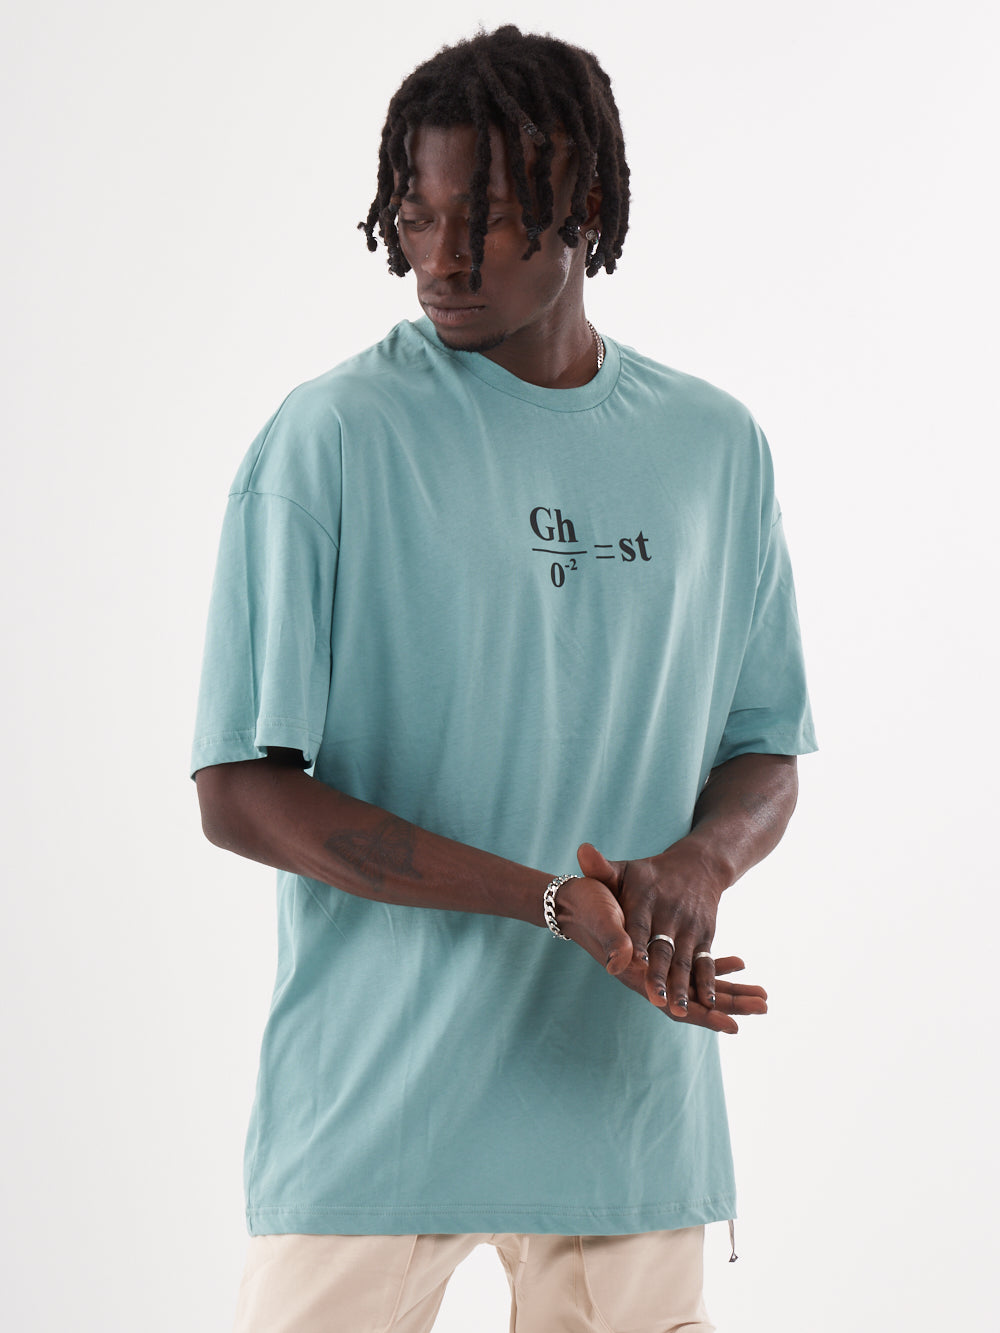 A man wearing a blue GHOST T-SHIRT with the word ghetto on it.